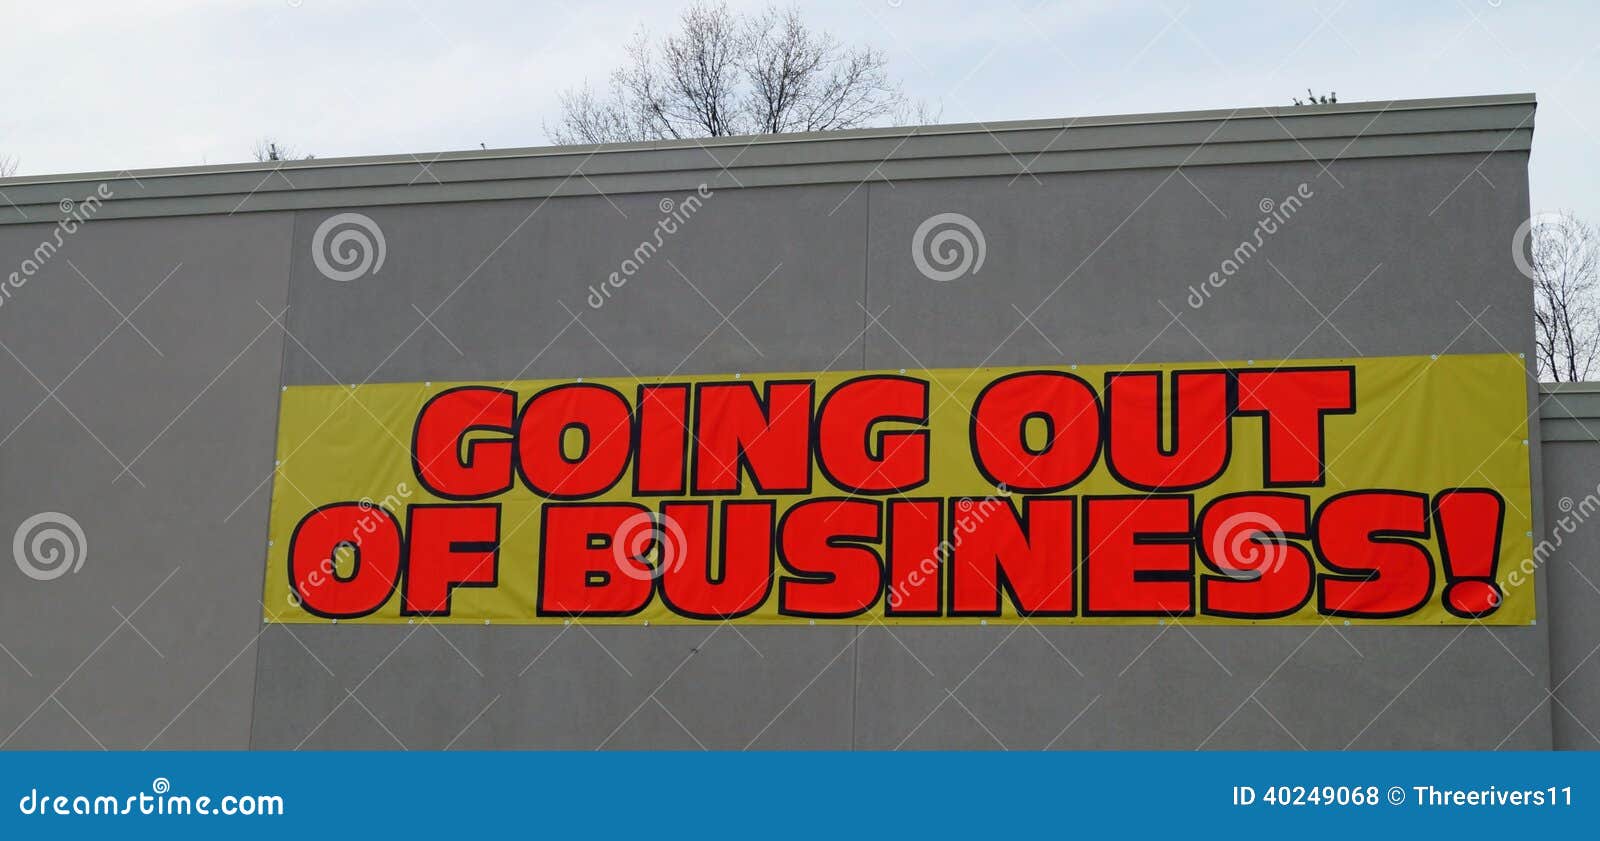 Going Out of Business Sign stock photo. Image of closing 40249068